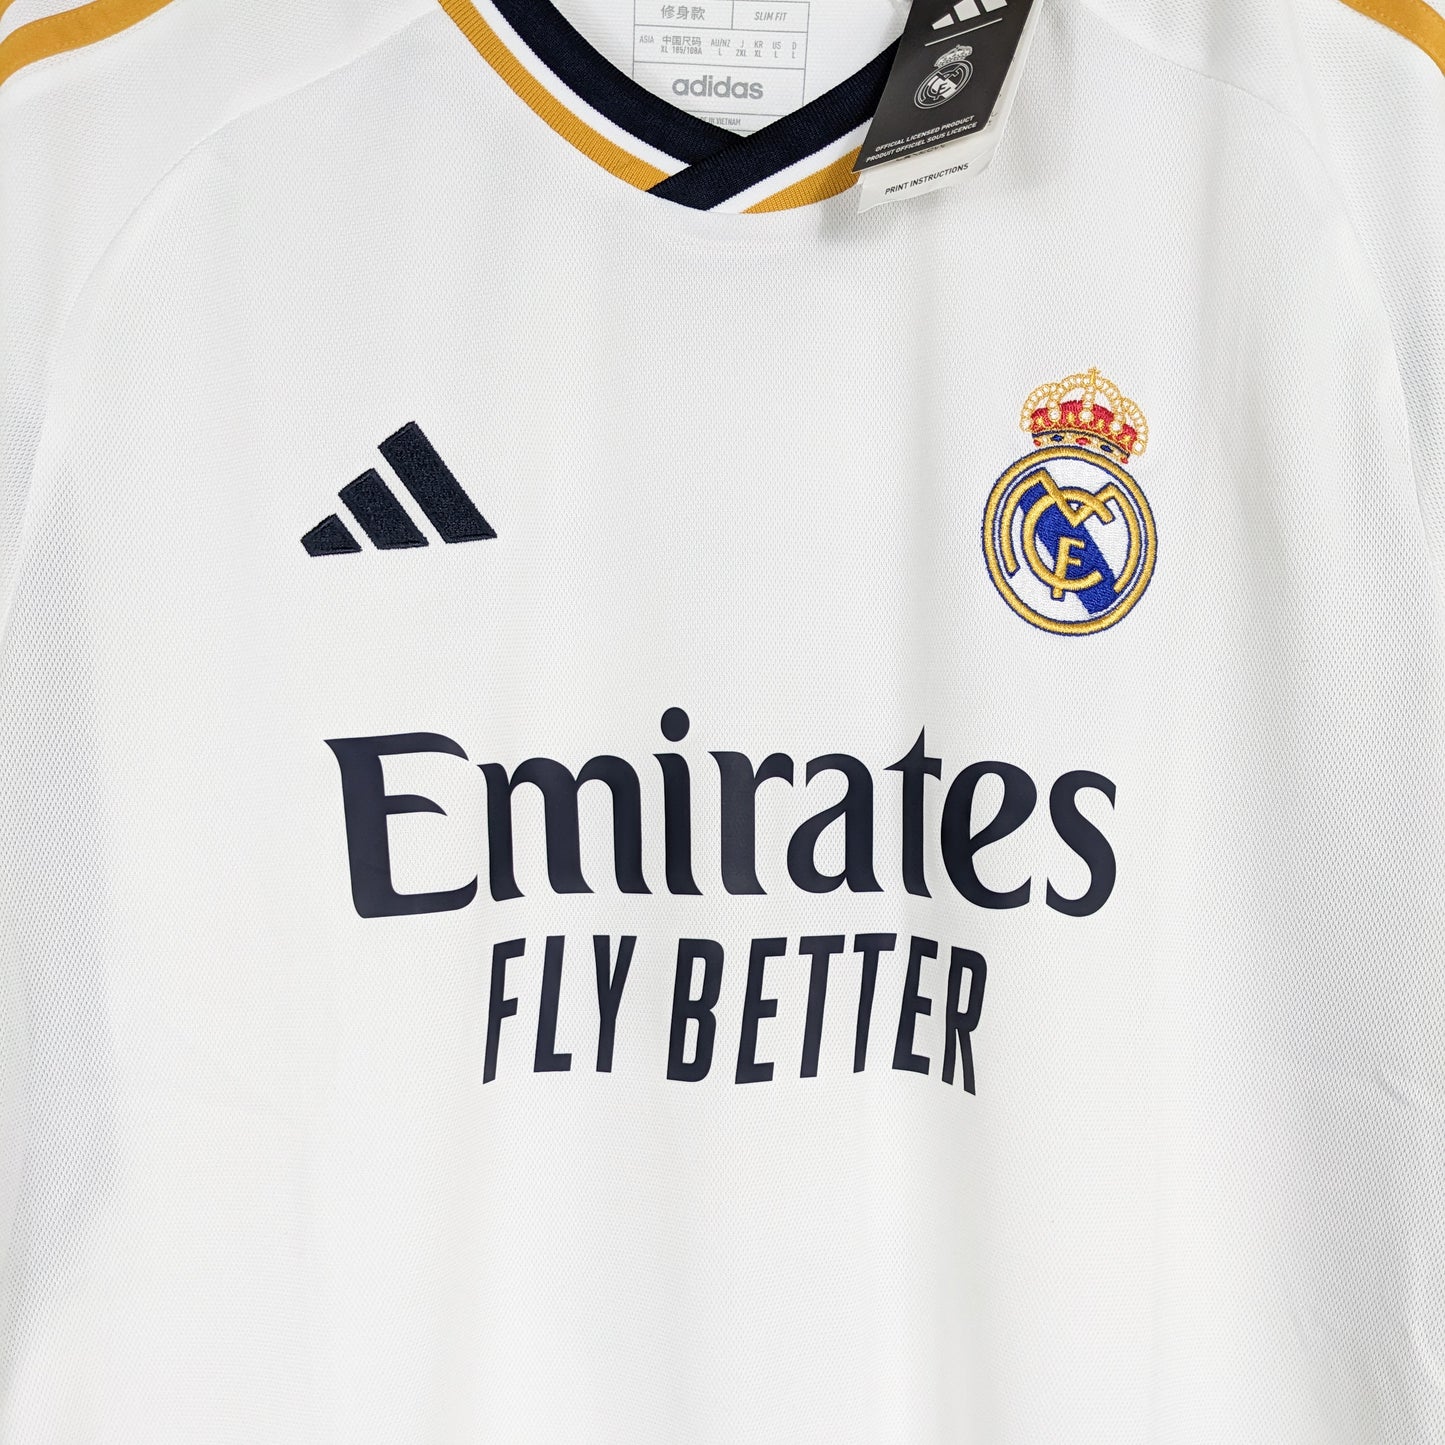 Authentic Real Madrid 2023/2024 Home - Bellingham #5 Size XL (Bnwt)